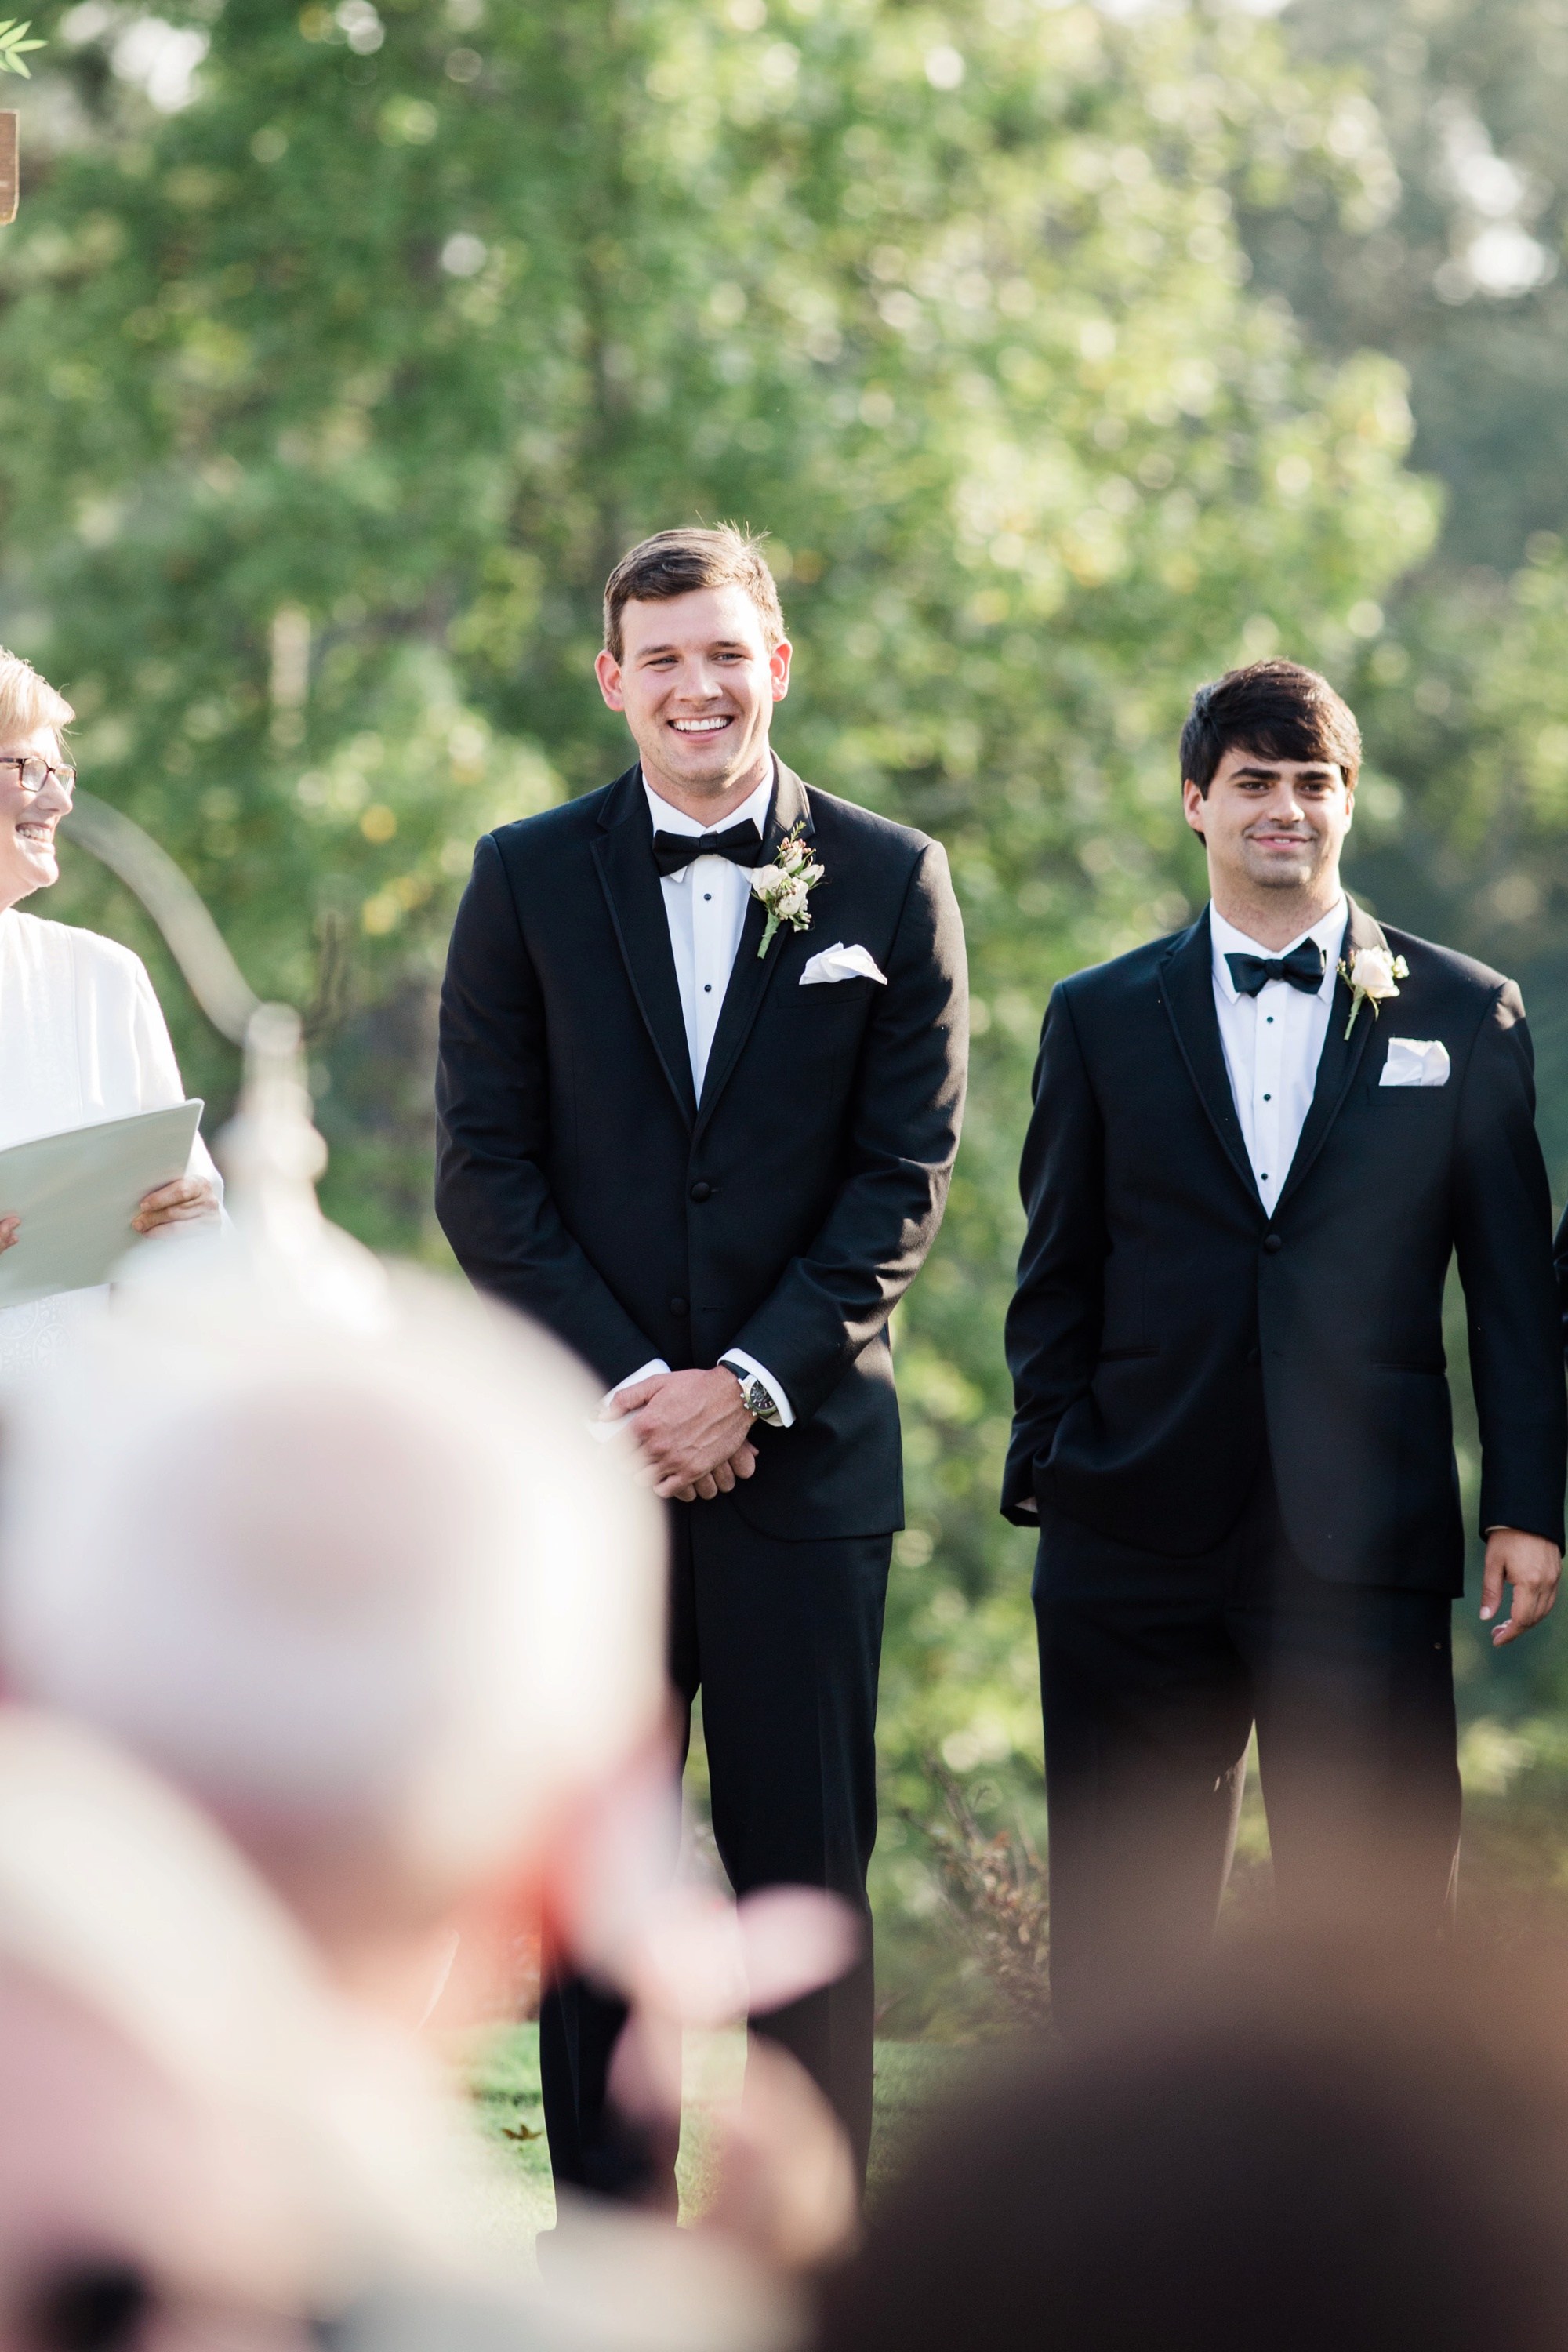 Groom joyfully awaits his bride at the end of the aisle at Foxhall Sporting Club. Photo by Rebecca Cerasani.